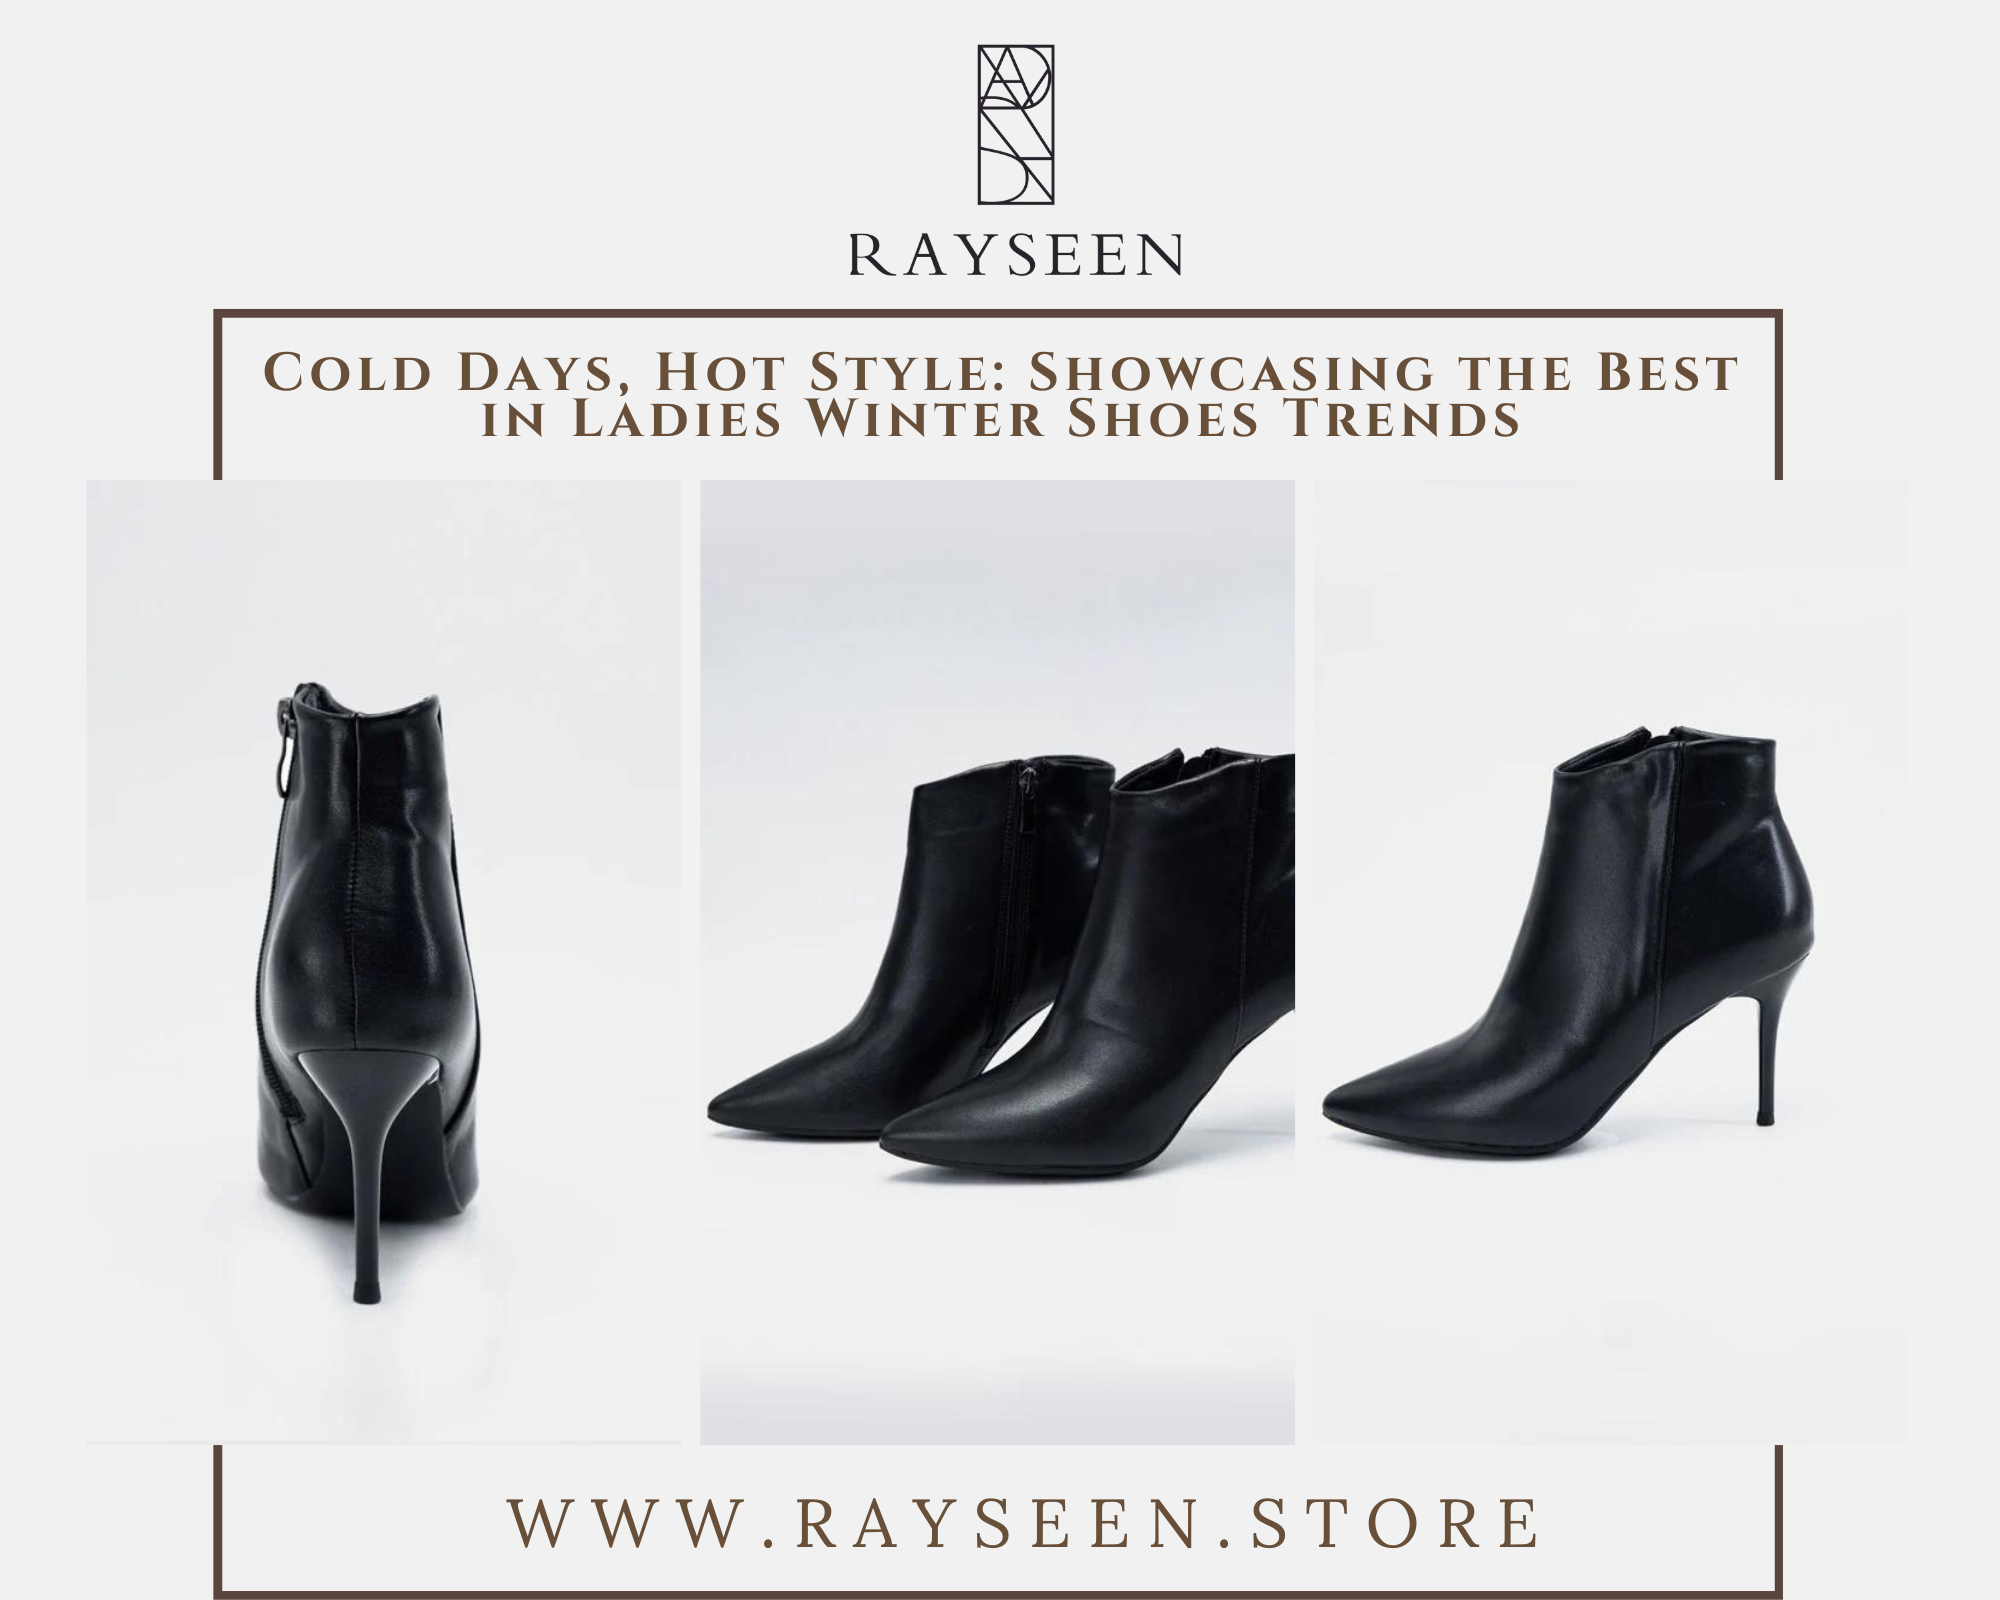 Cold Days, Hot Style: Showcasing the Best in Ladies Winter Shoes Trends